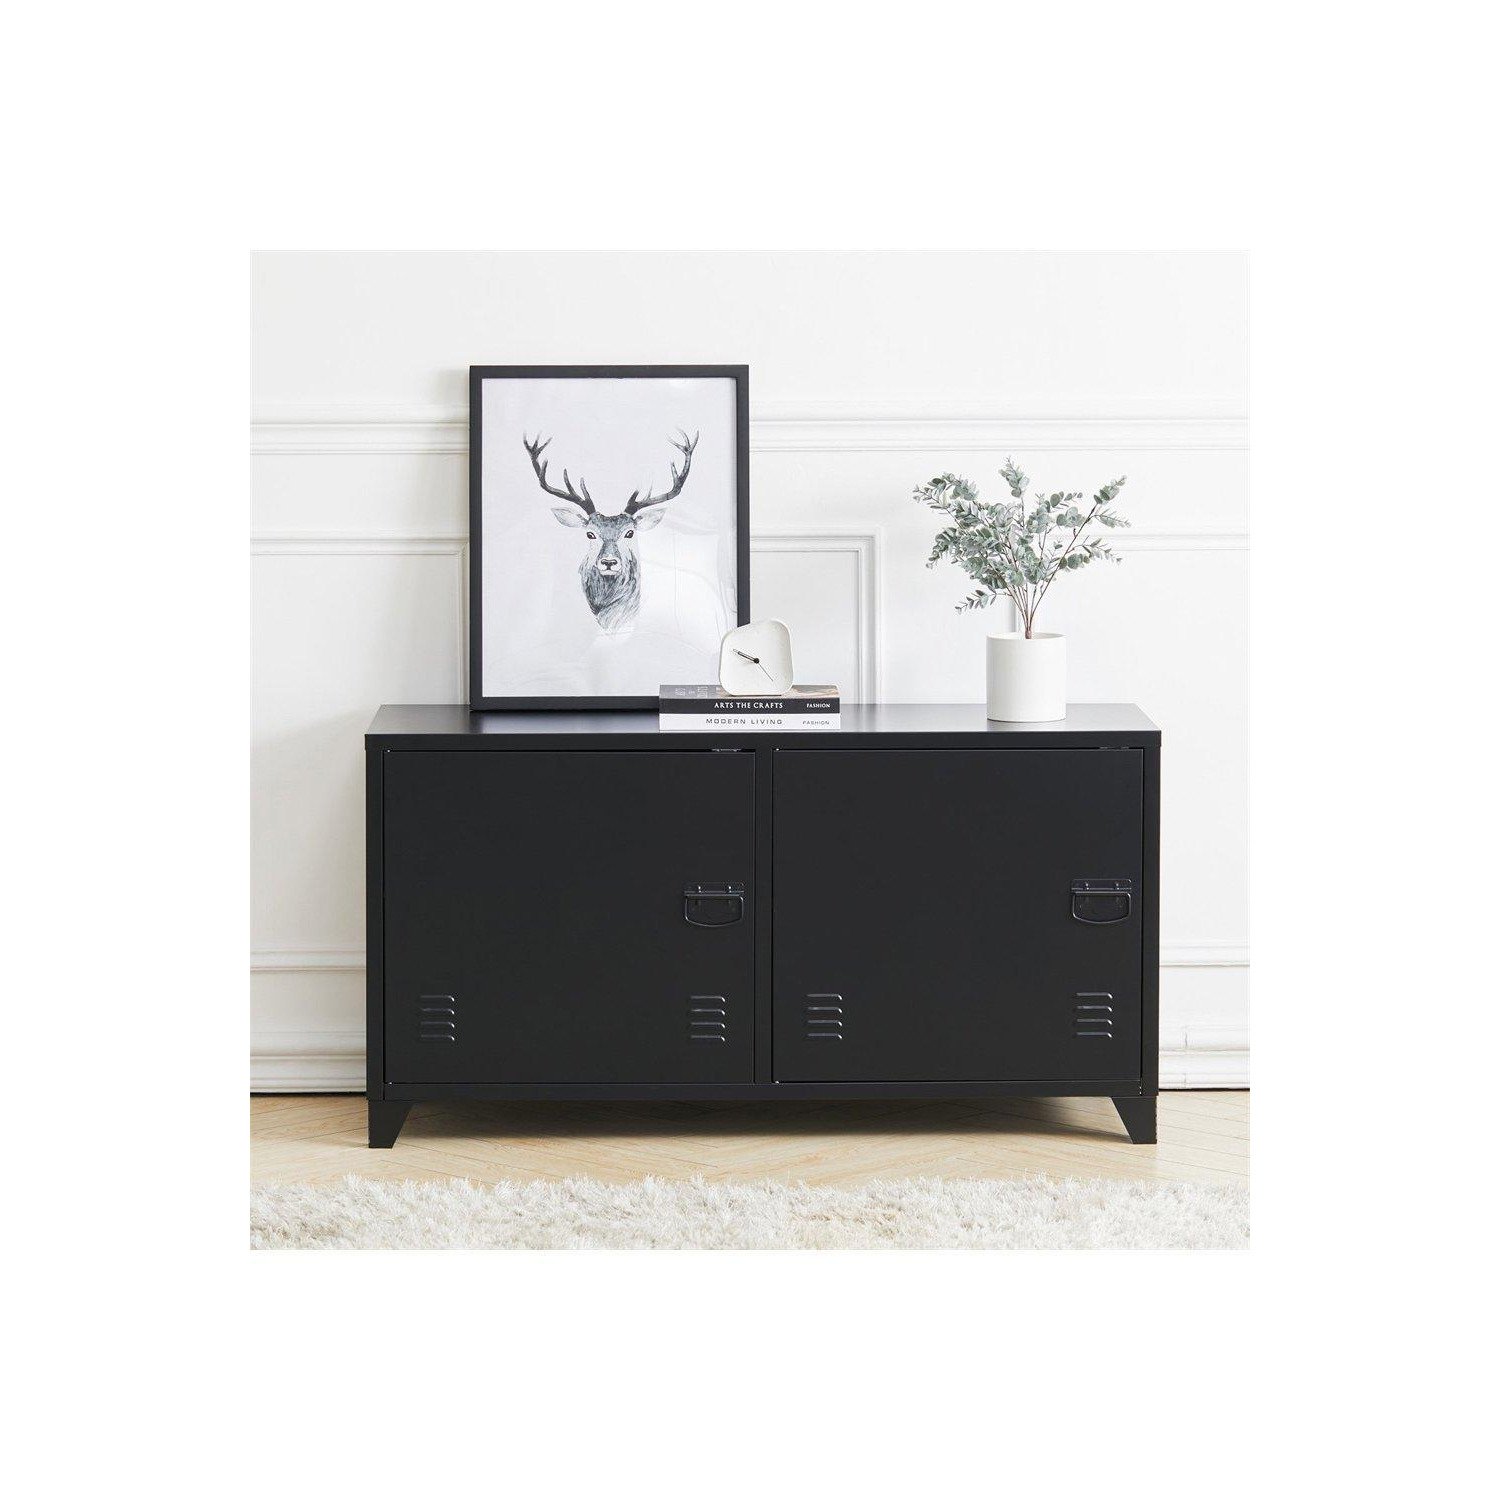 Industrial Style Metal File Cabinet with 2 Doors TV Stand Storage Cabinet - image 1